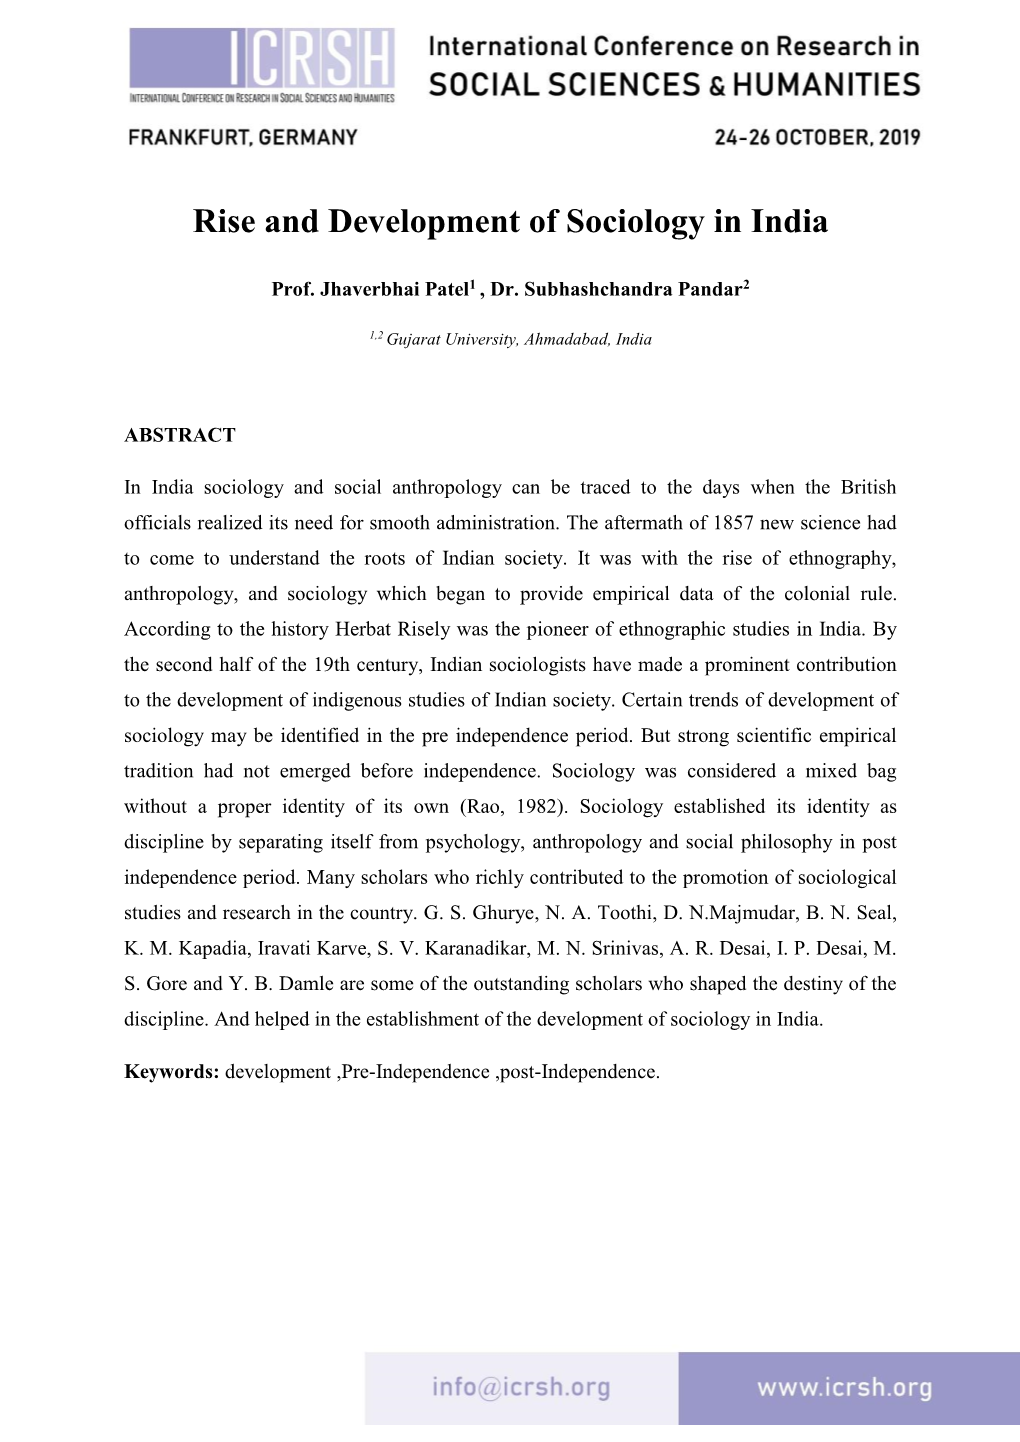 Rise and Development of Sociology in India